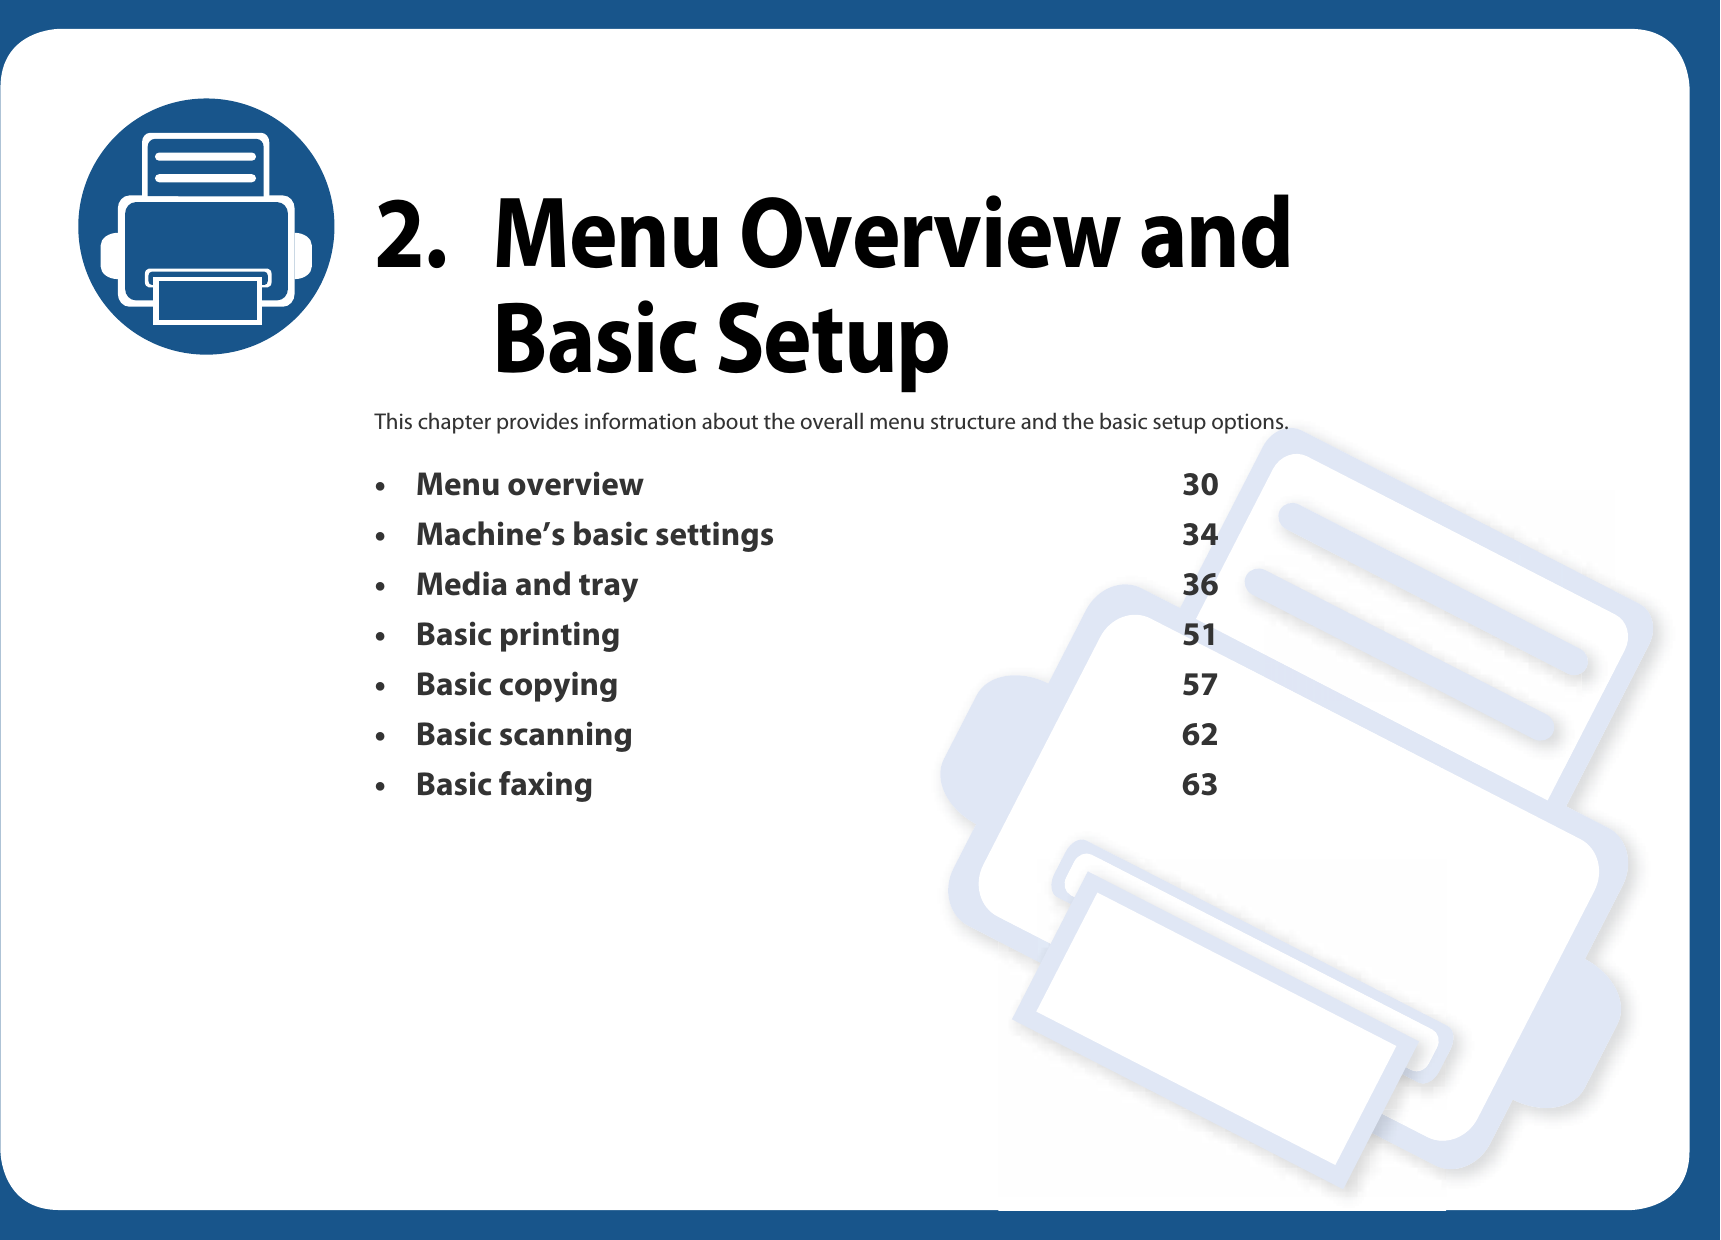 2. Menu Overview and Basic SetupThis chapter provides information about the overall menu structure and the basic setup options.• Menu overview 30• Machine’s basic settings 34• Media and tray 36• Basic printing 51• Basic copying 57• Basic scanning 62• Basic faxing 63